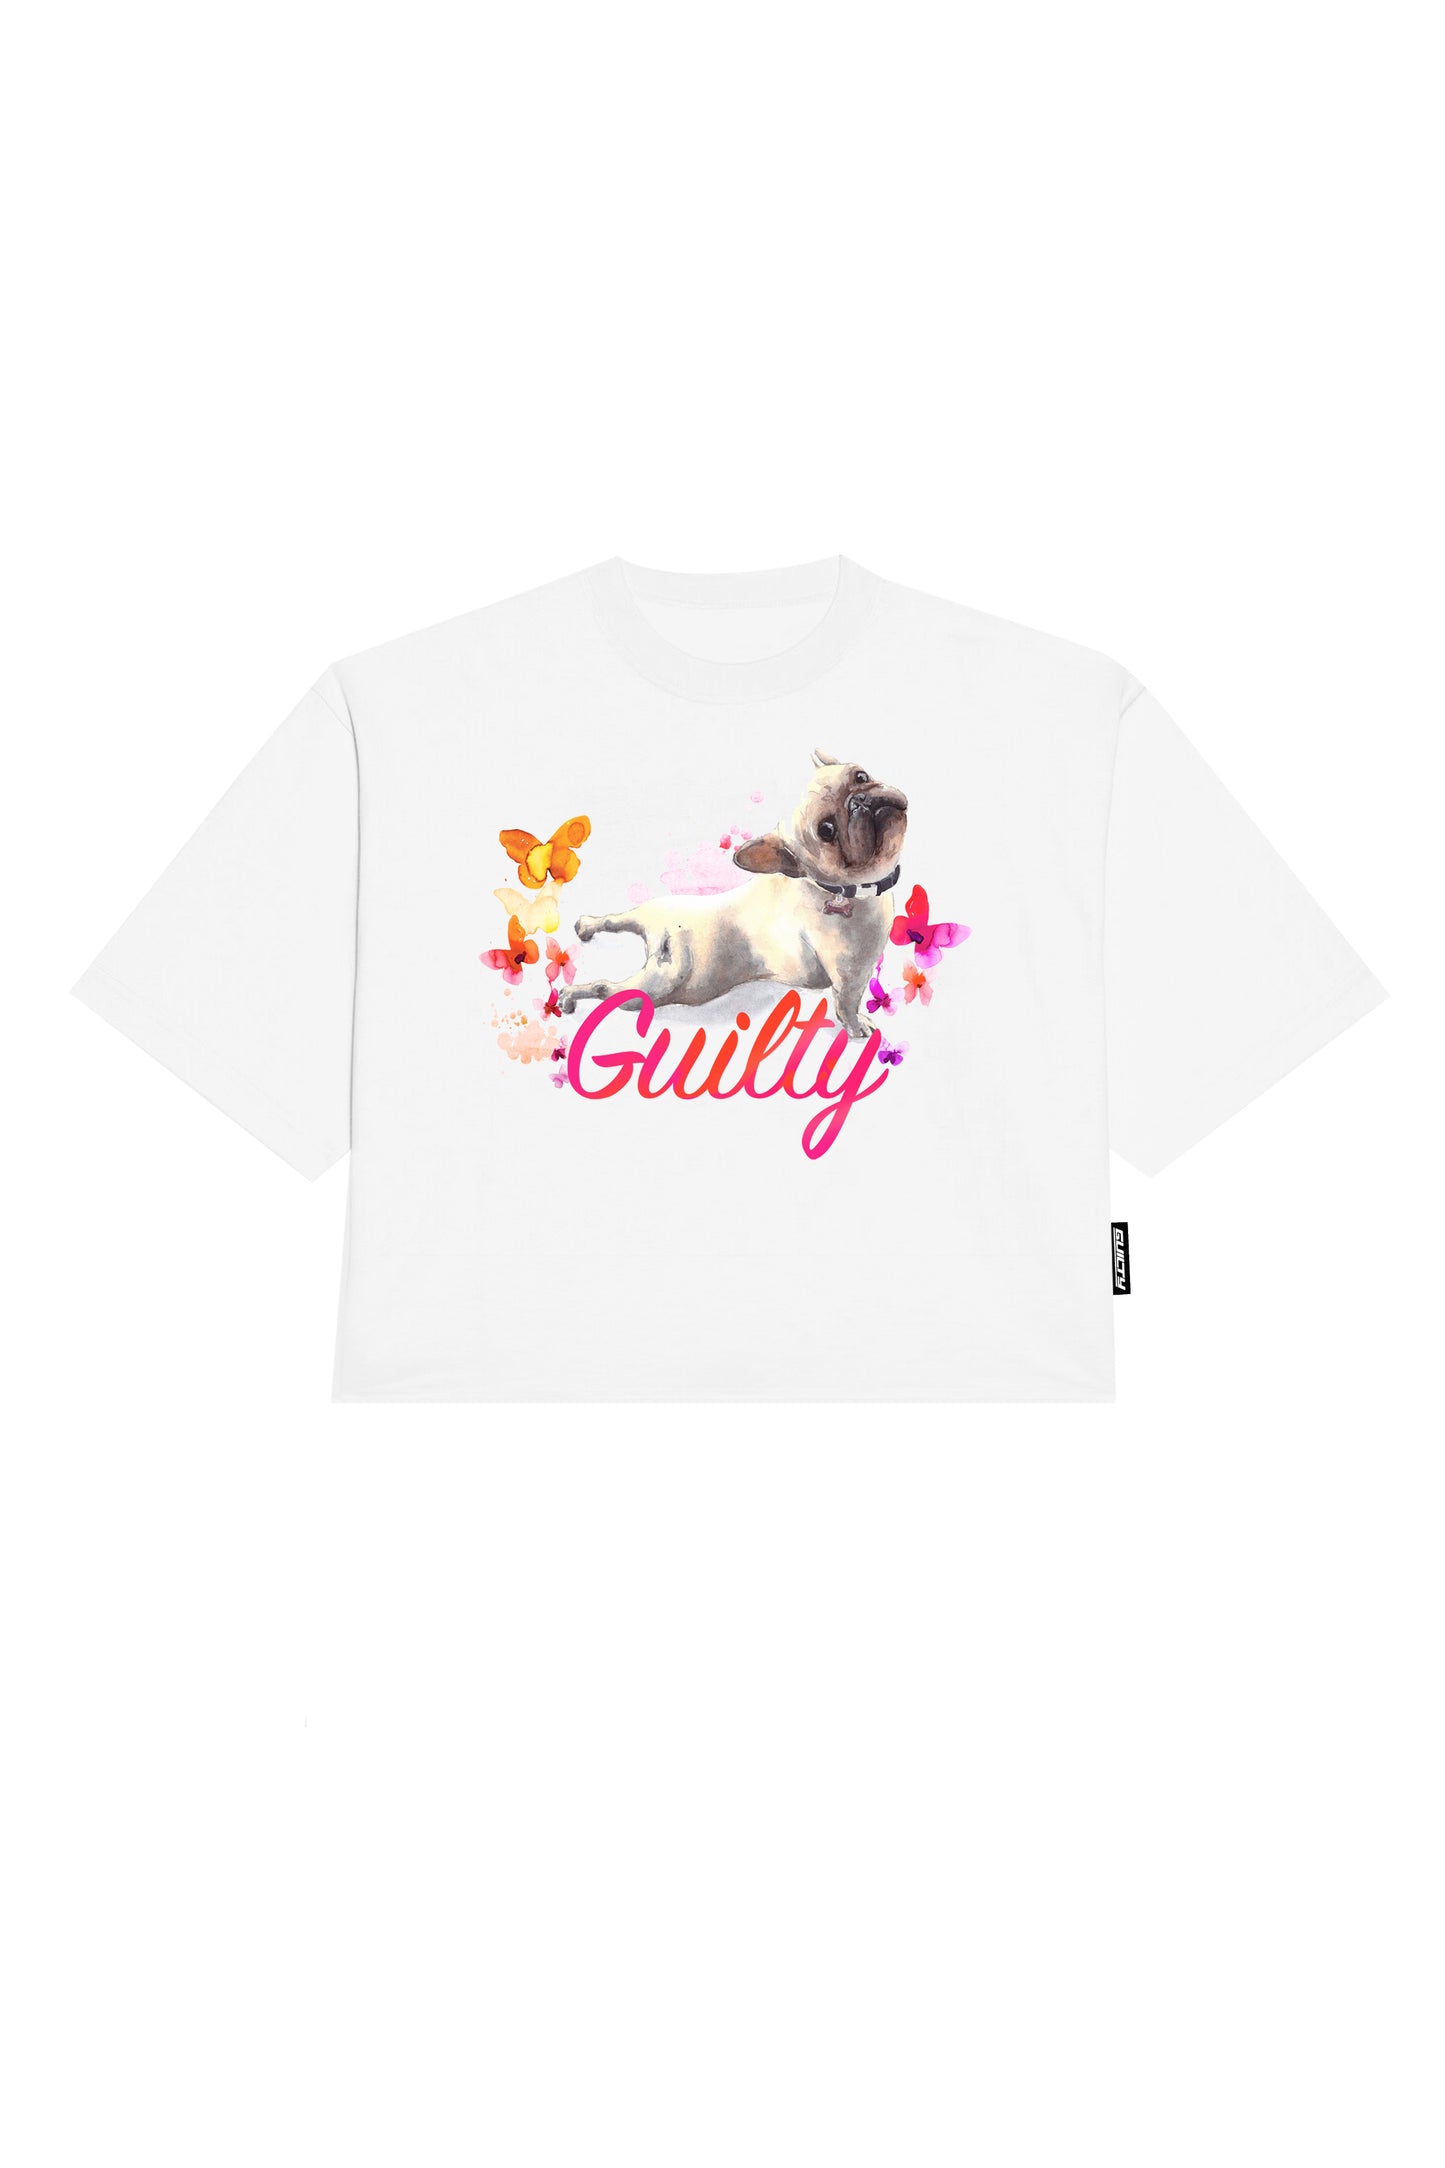 "DOGGY" Cropped T-shirt